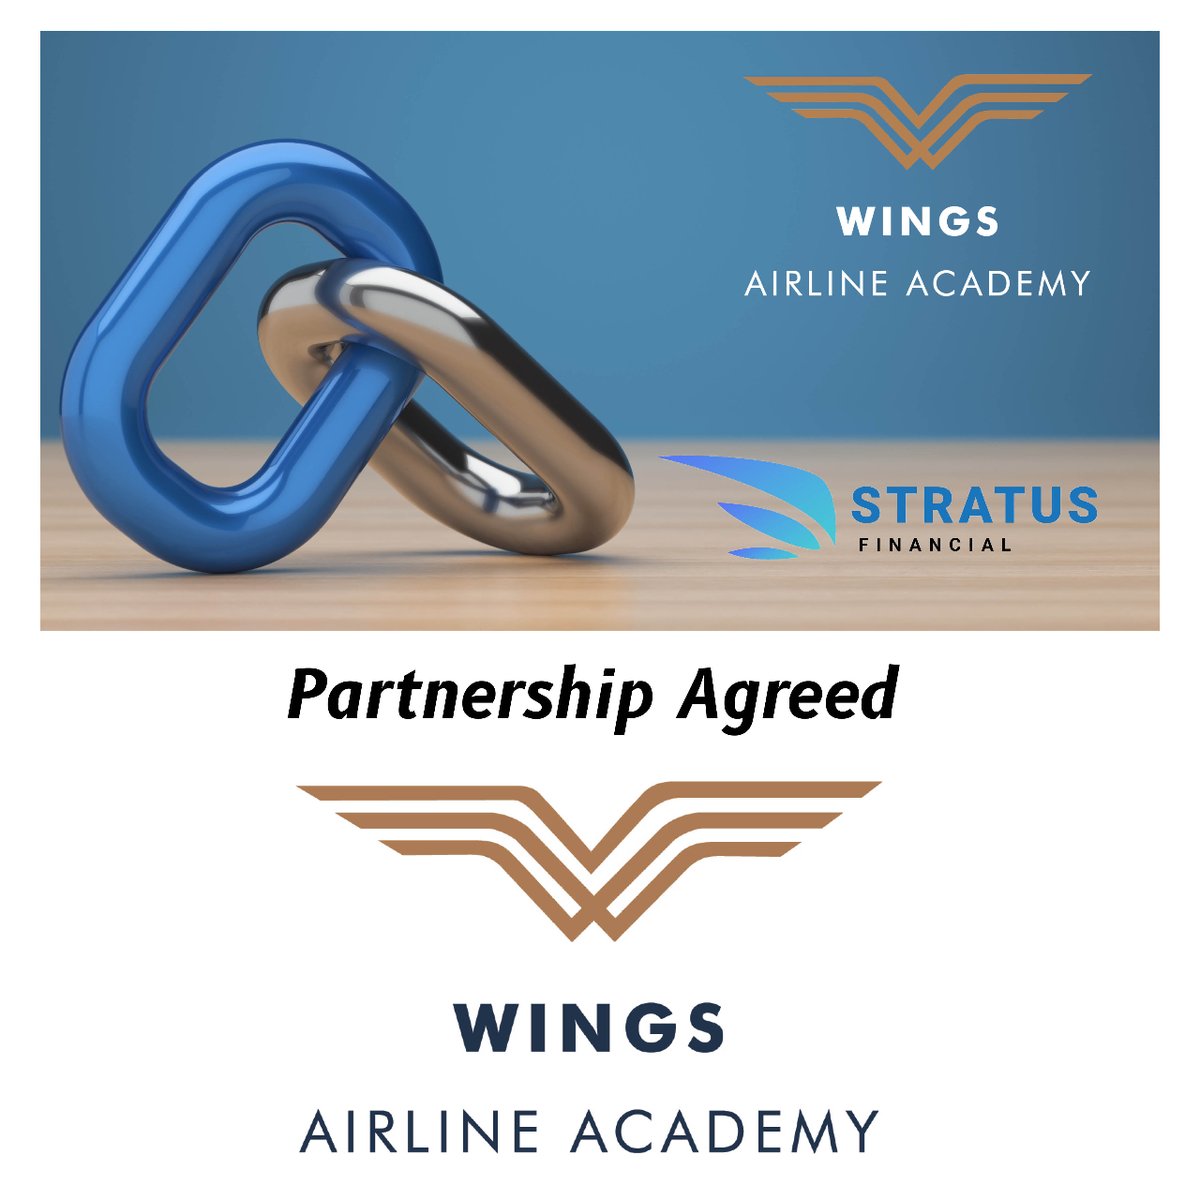 Wings Airline Academy are excited to announce a partnership with Stratus Financial who specialise in helping
pilots achieve their flight dreams through hassle-free flight school loans program. 

#stratusfinancial #studentloan #Pilottraining #studentflight #Florida #FlyToSuccess